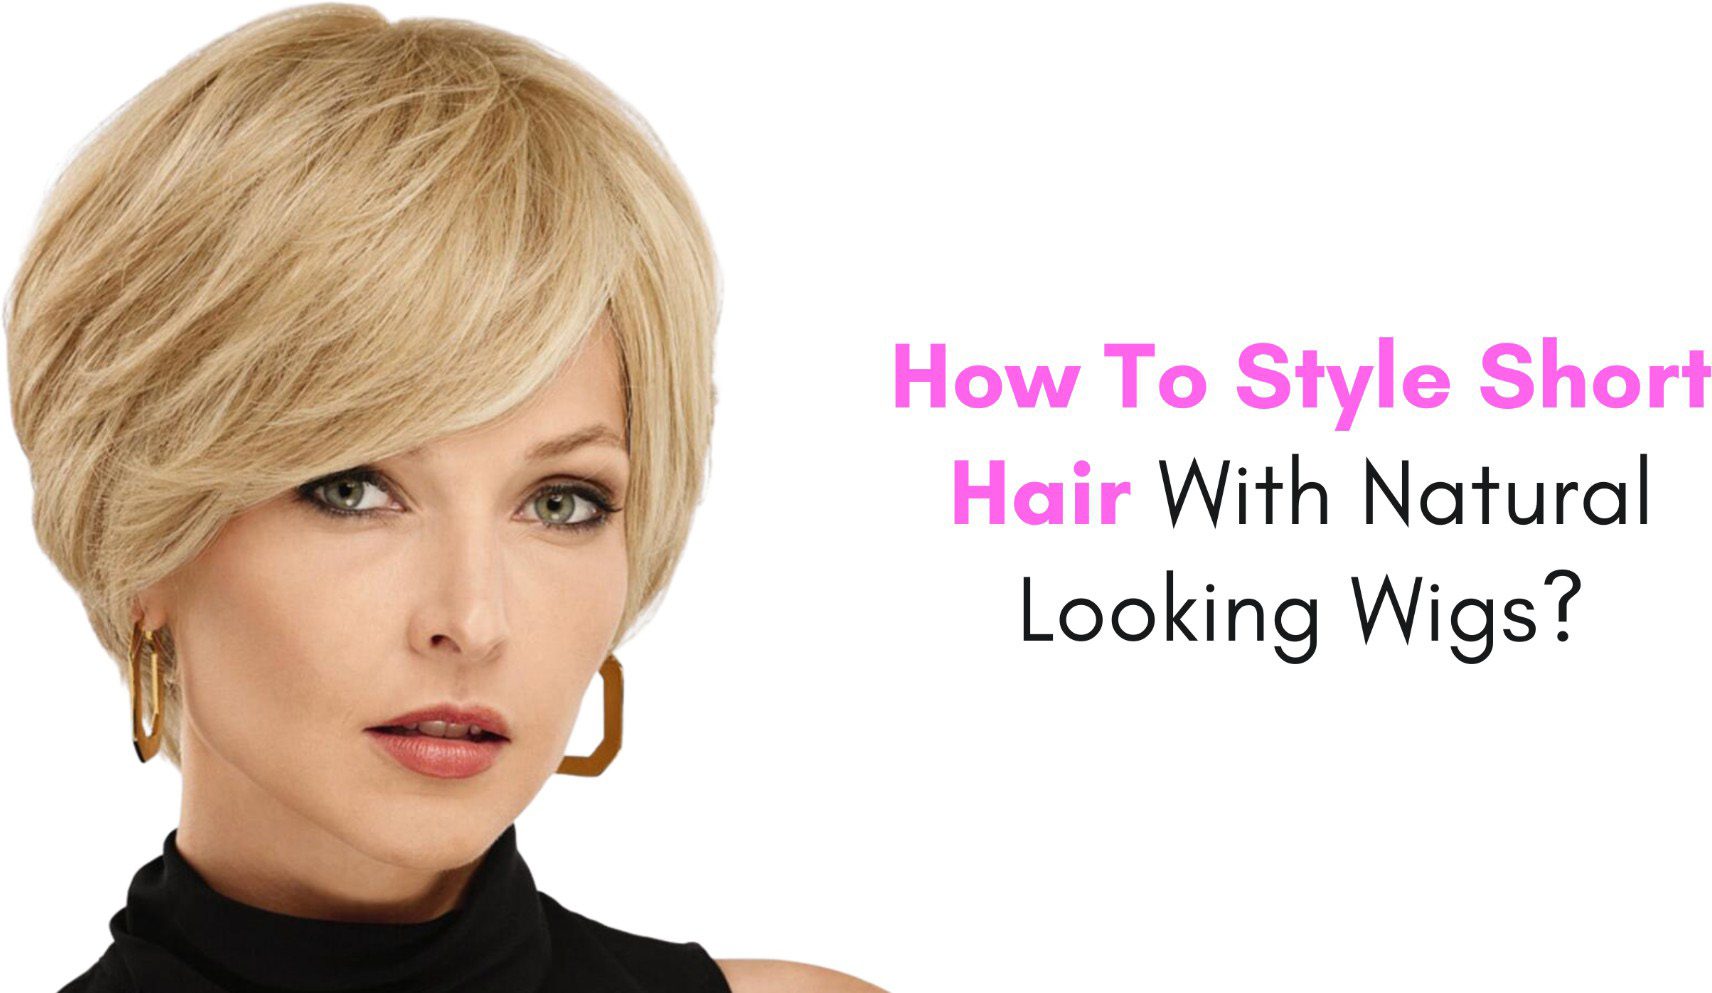 How To Style Short Hair With Natural Looking Wigs?